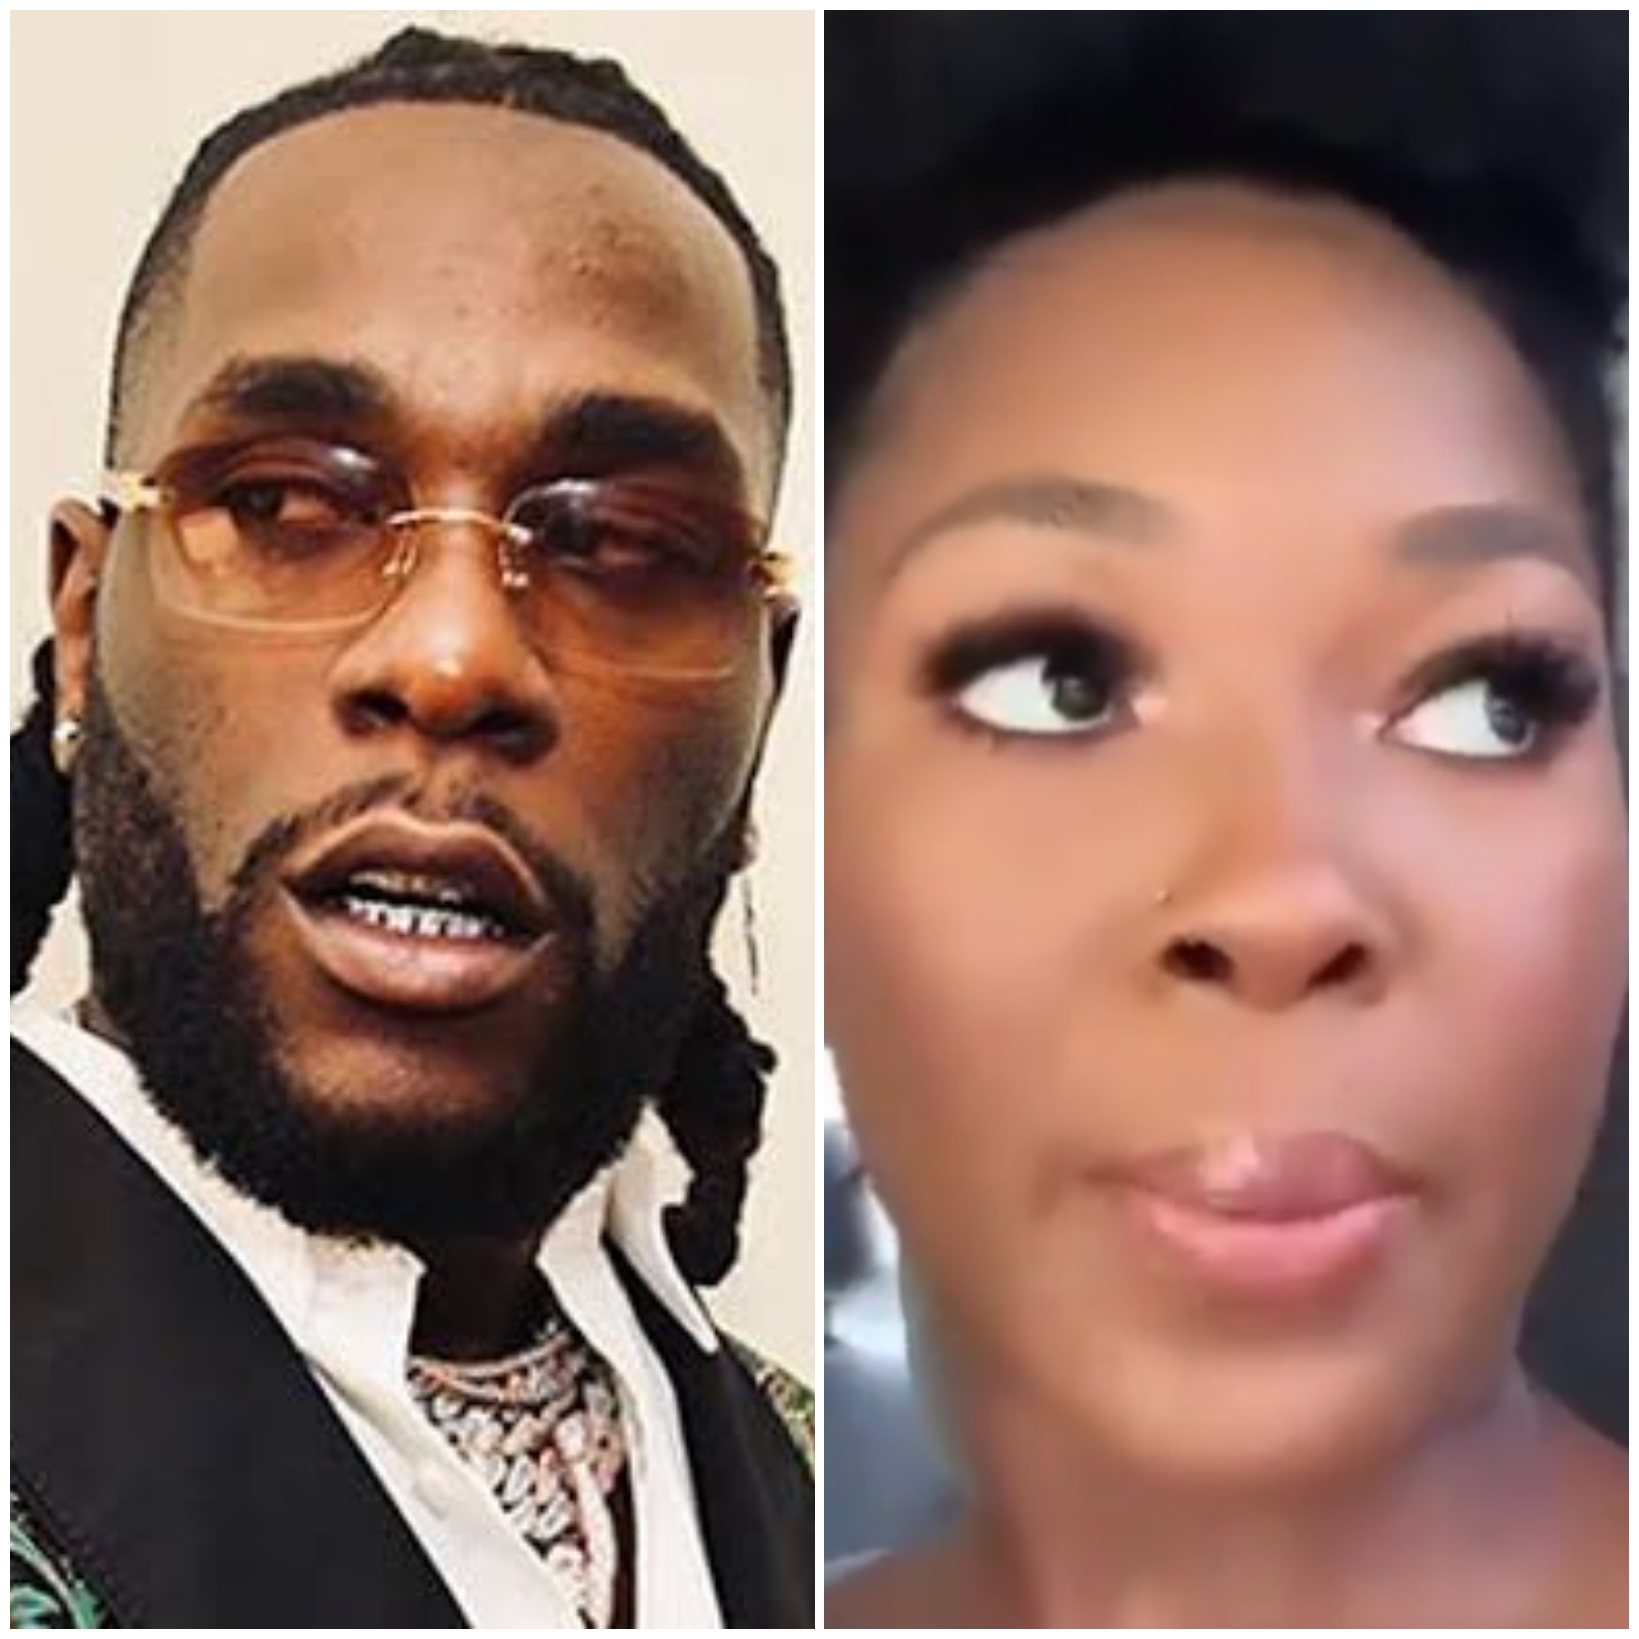 Burnaboy Teaches Vee 23 Spiritual Things, Find Out